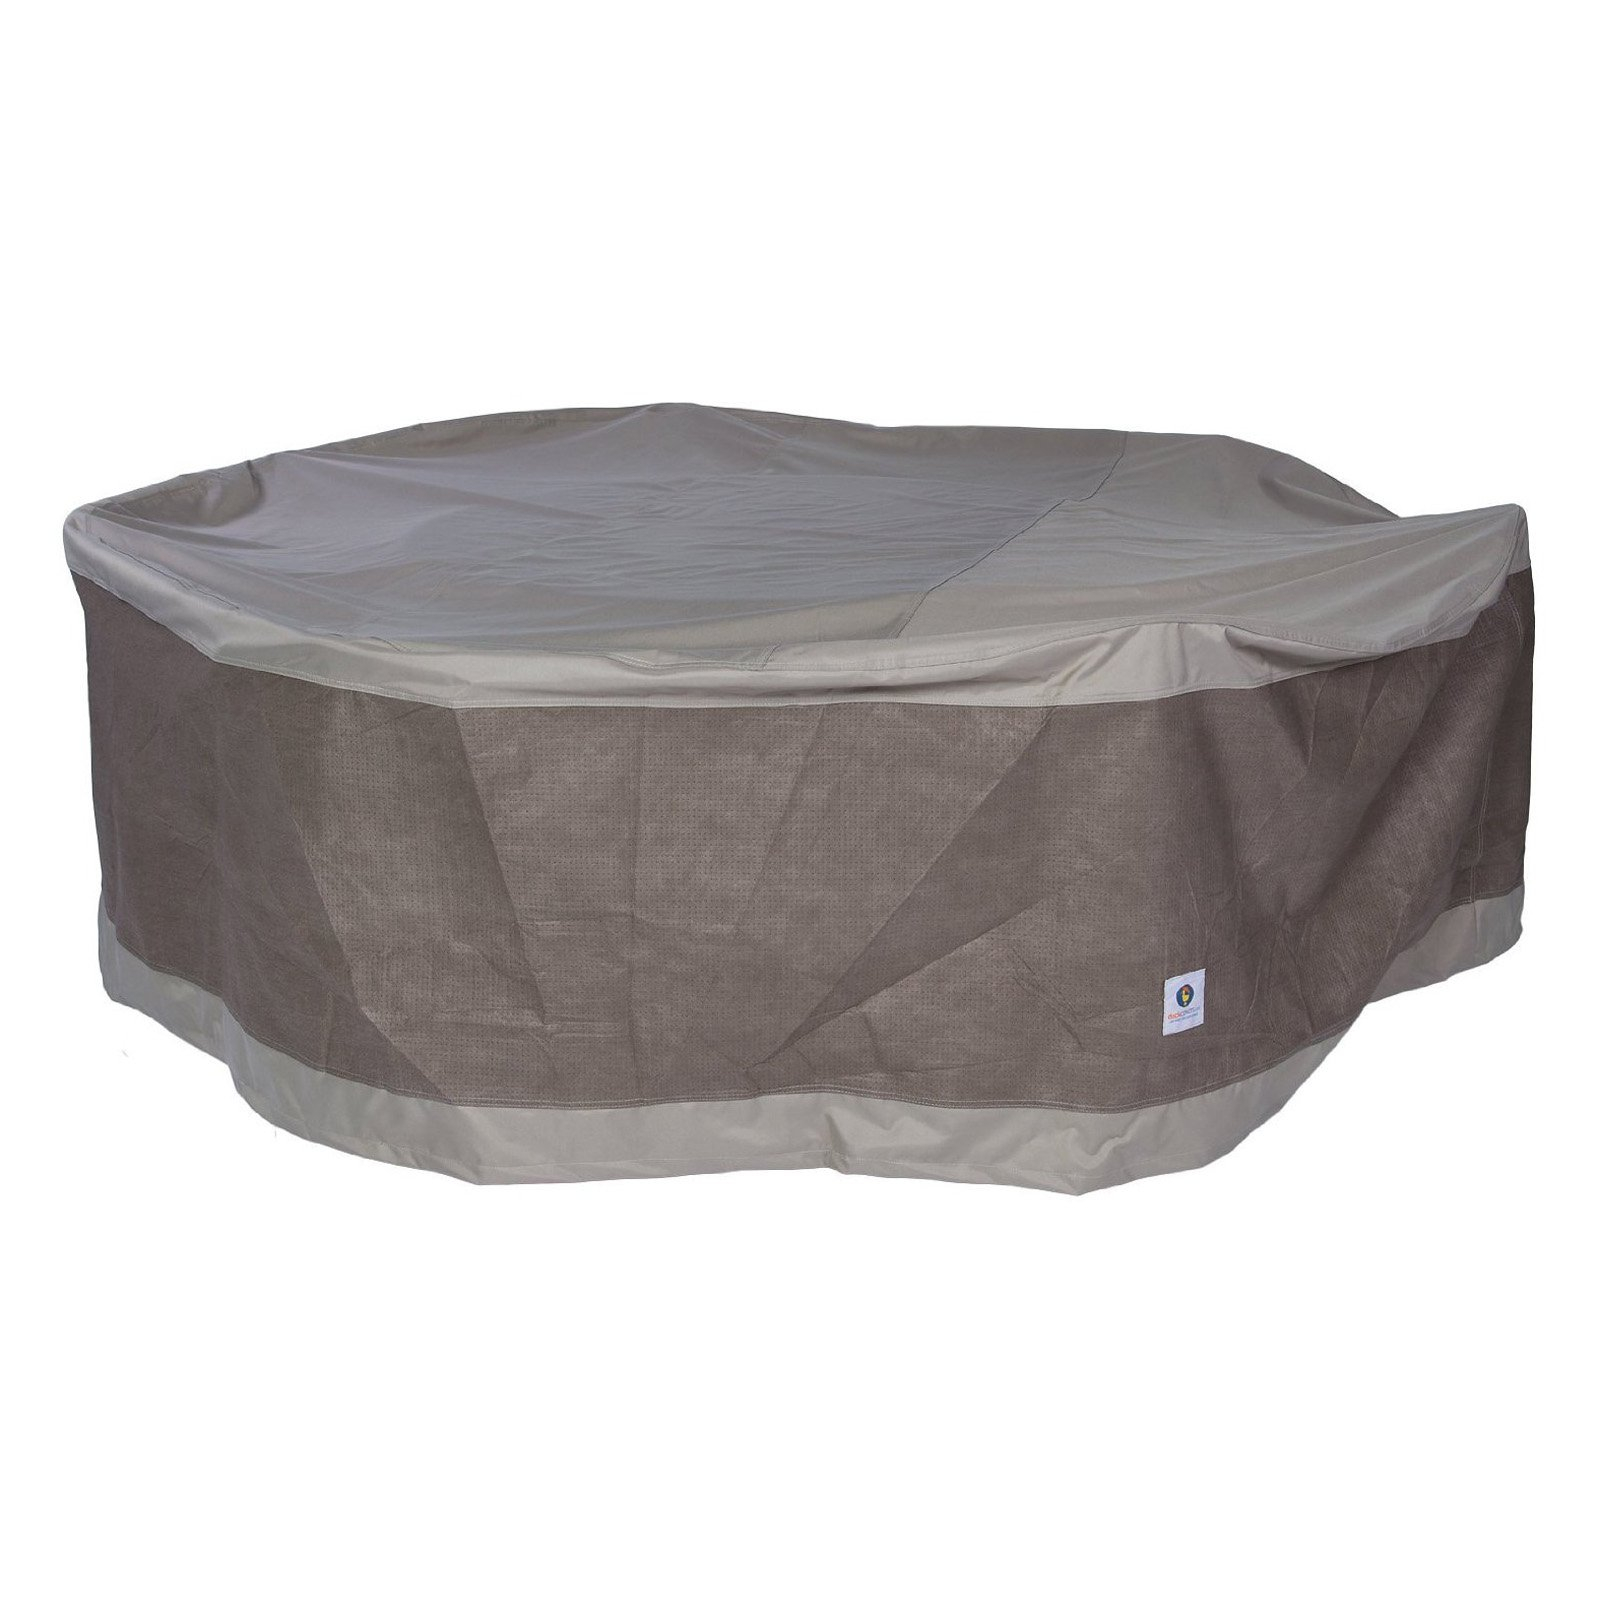 Duck Covers Elegant Round Patio Table With Chairs Cover In intended for size 1600 X 1600